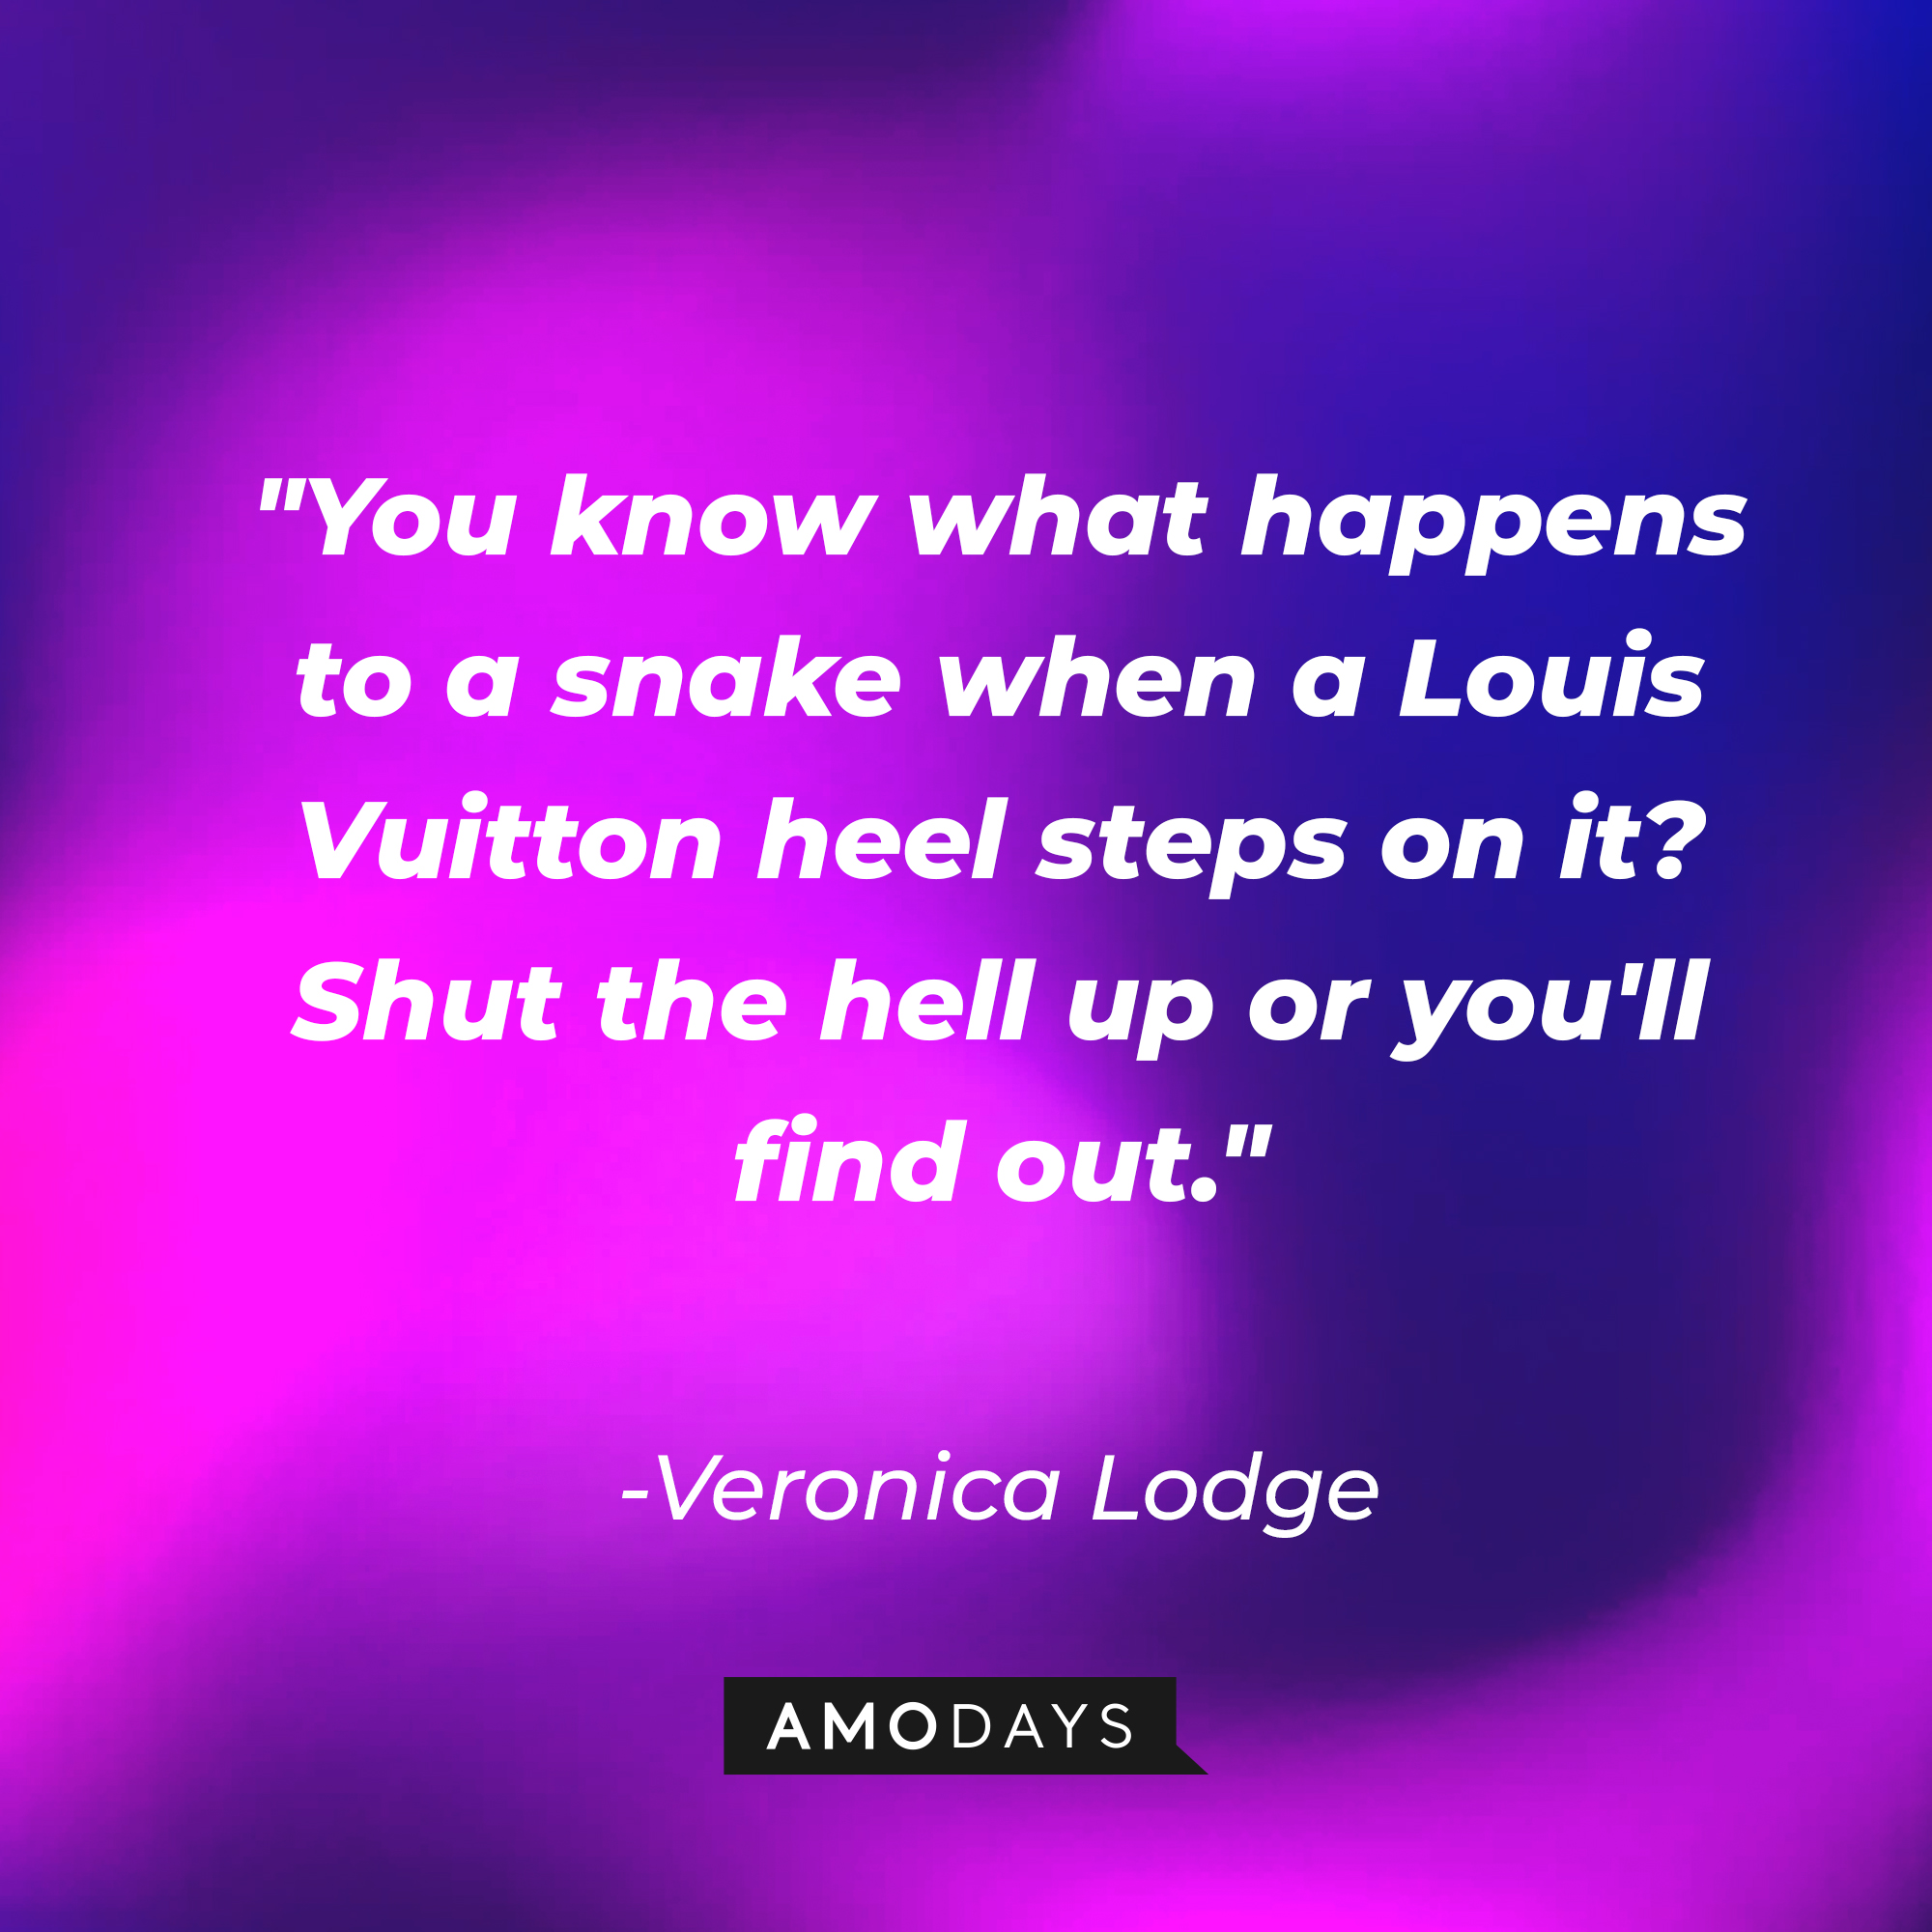 Veronica Lodge's quote: "You know what happens to a snake when a Louis Vuitton heel steps on it? Shut the hell up or you'll find out." | Source: AmoDays